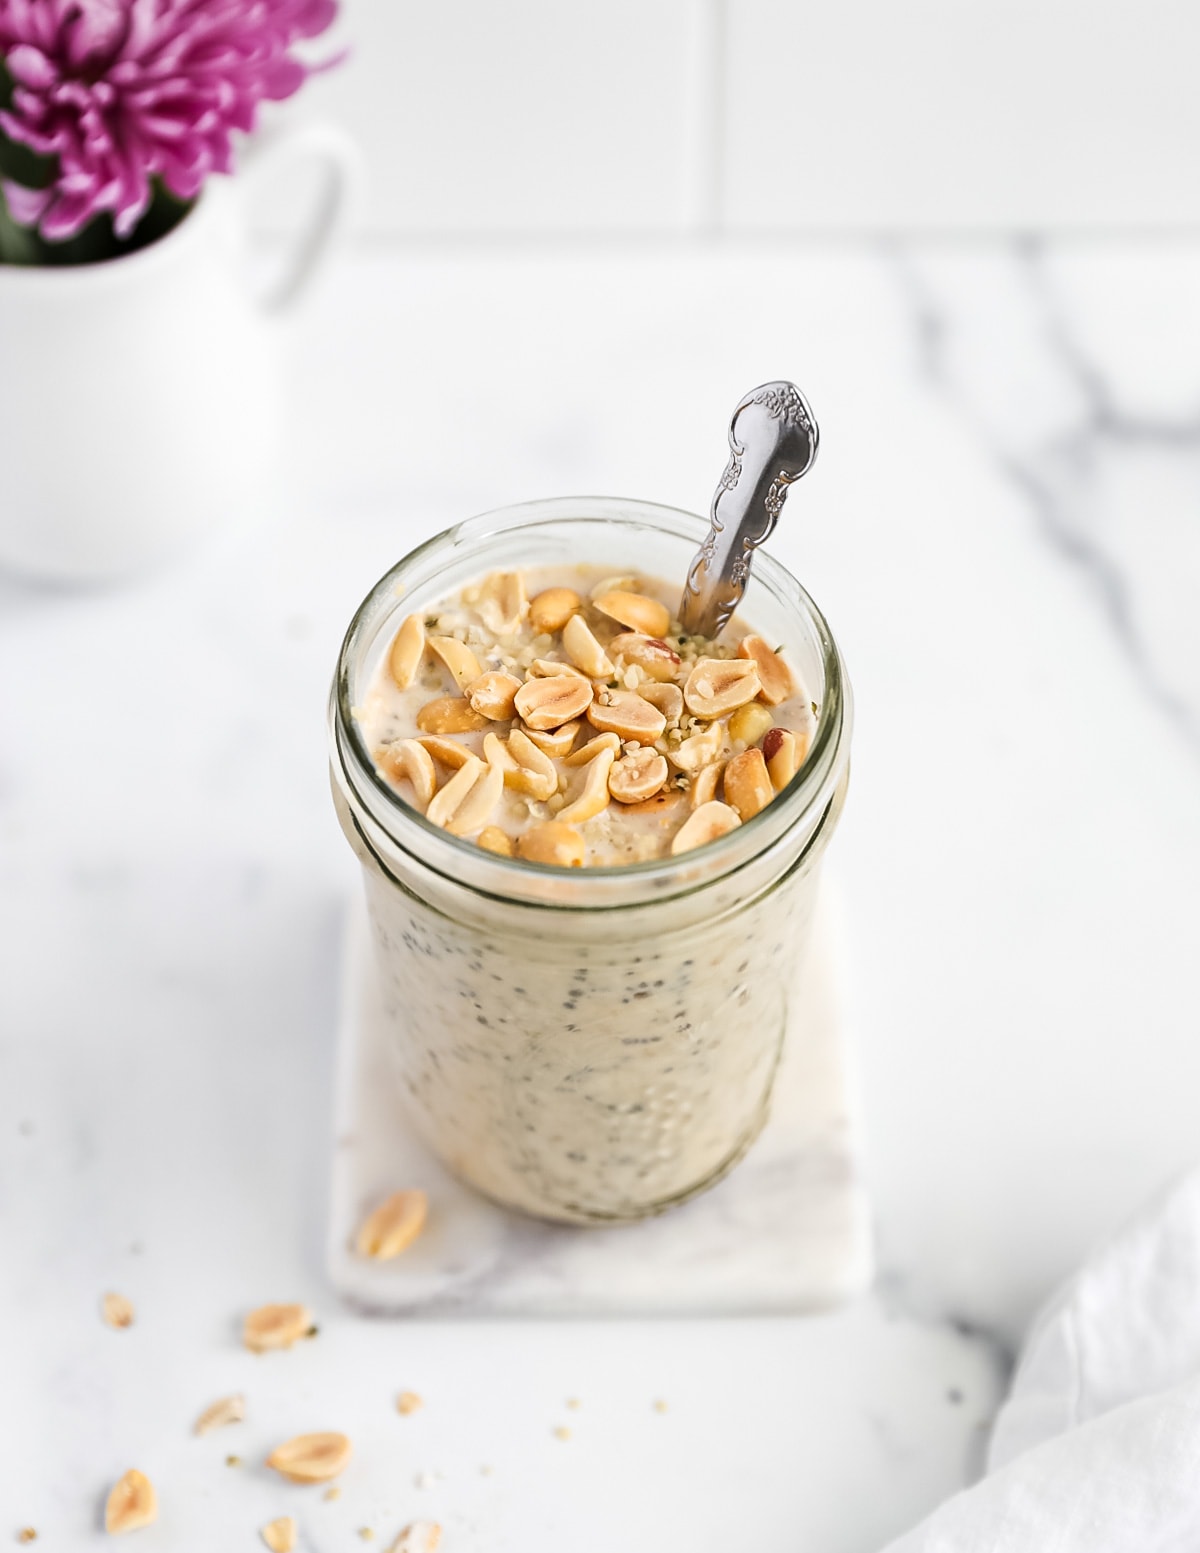 An overhead shot of a jar filled with overnight oats, the oats are topped with peanuts and hemp seeds, there is a spoon in the jar